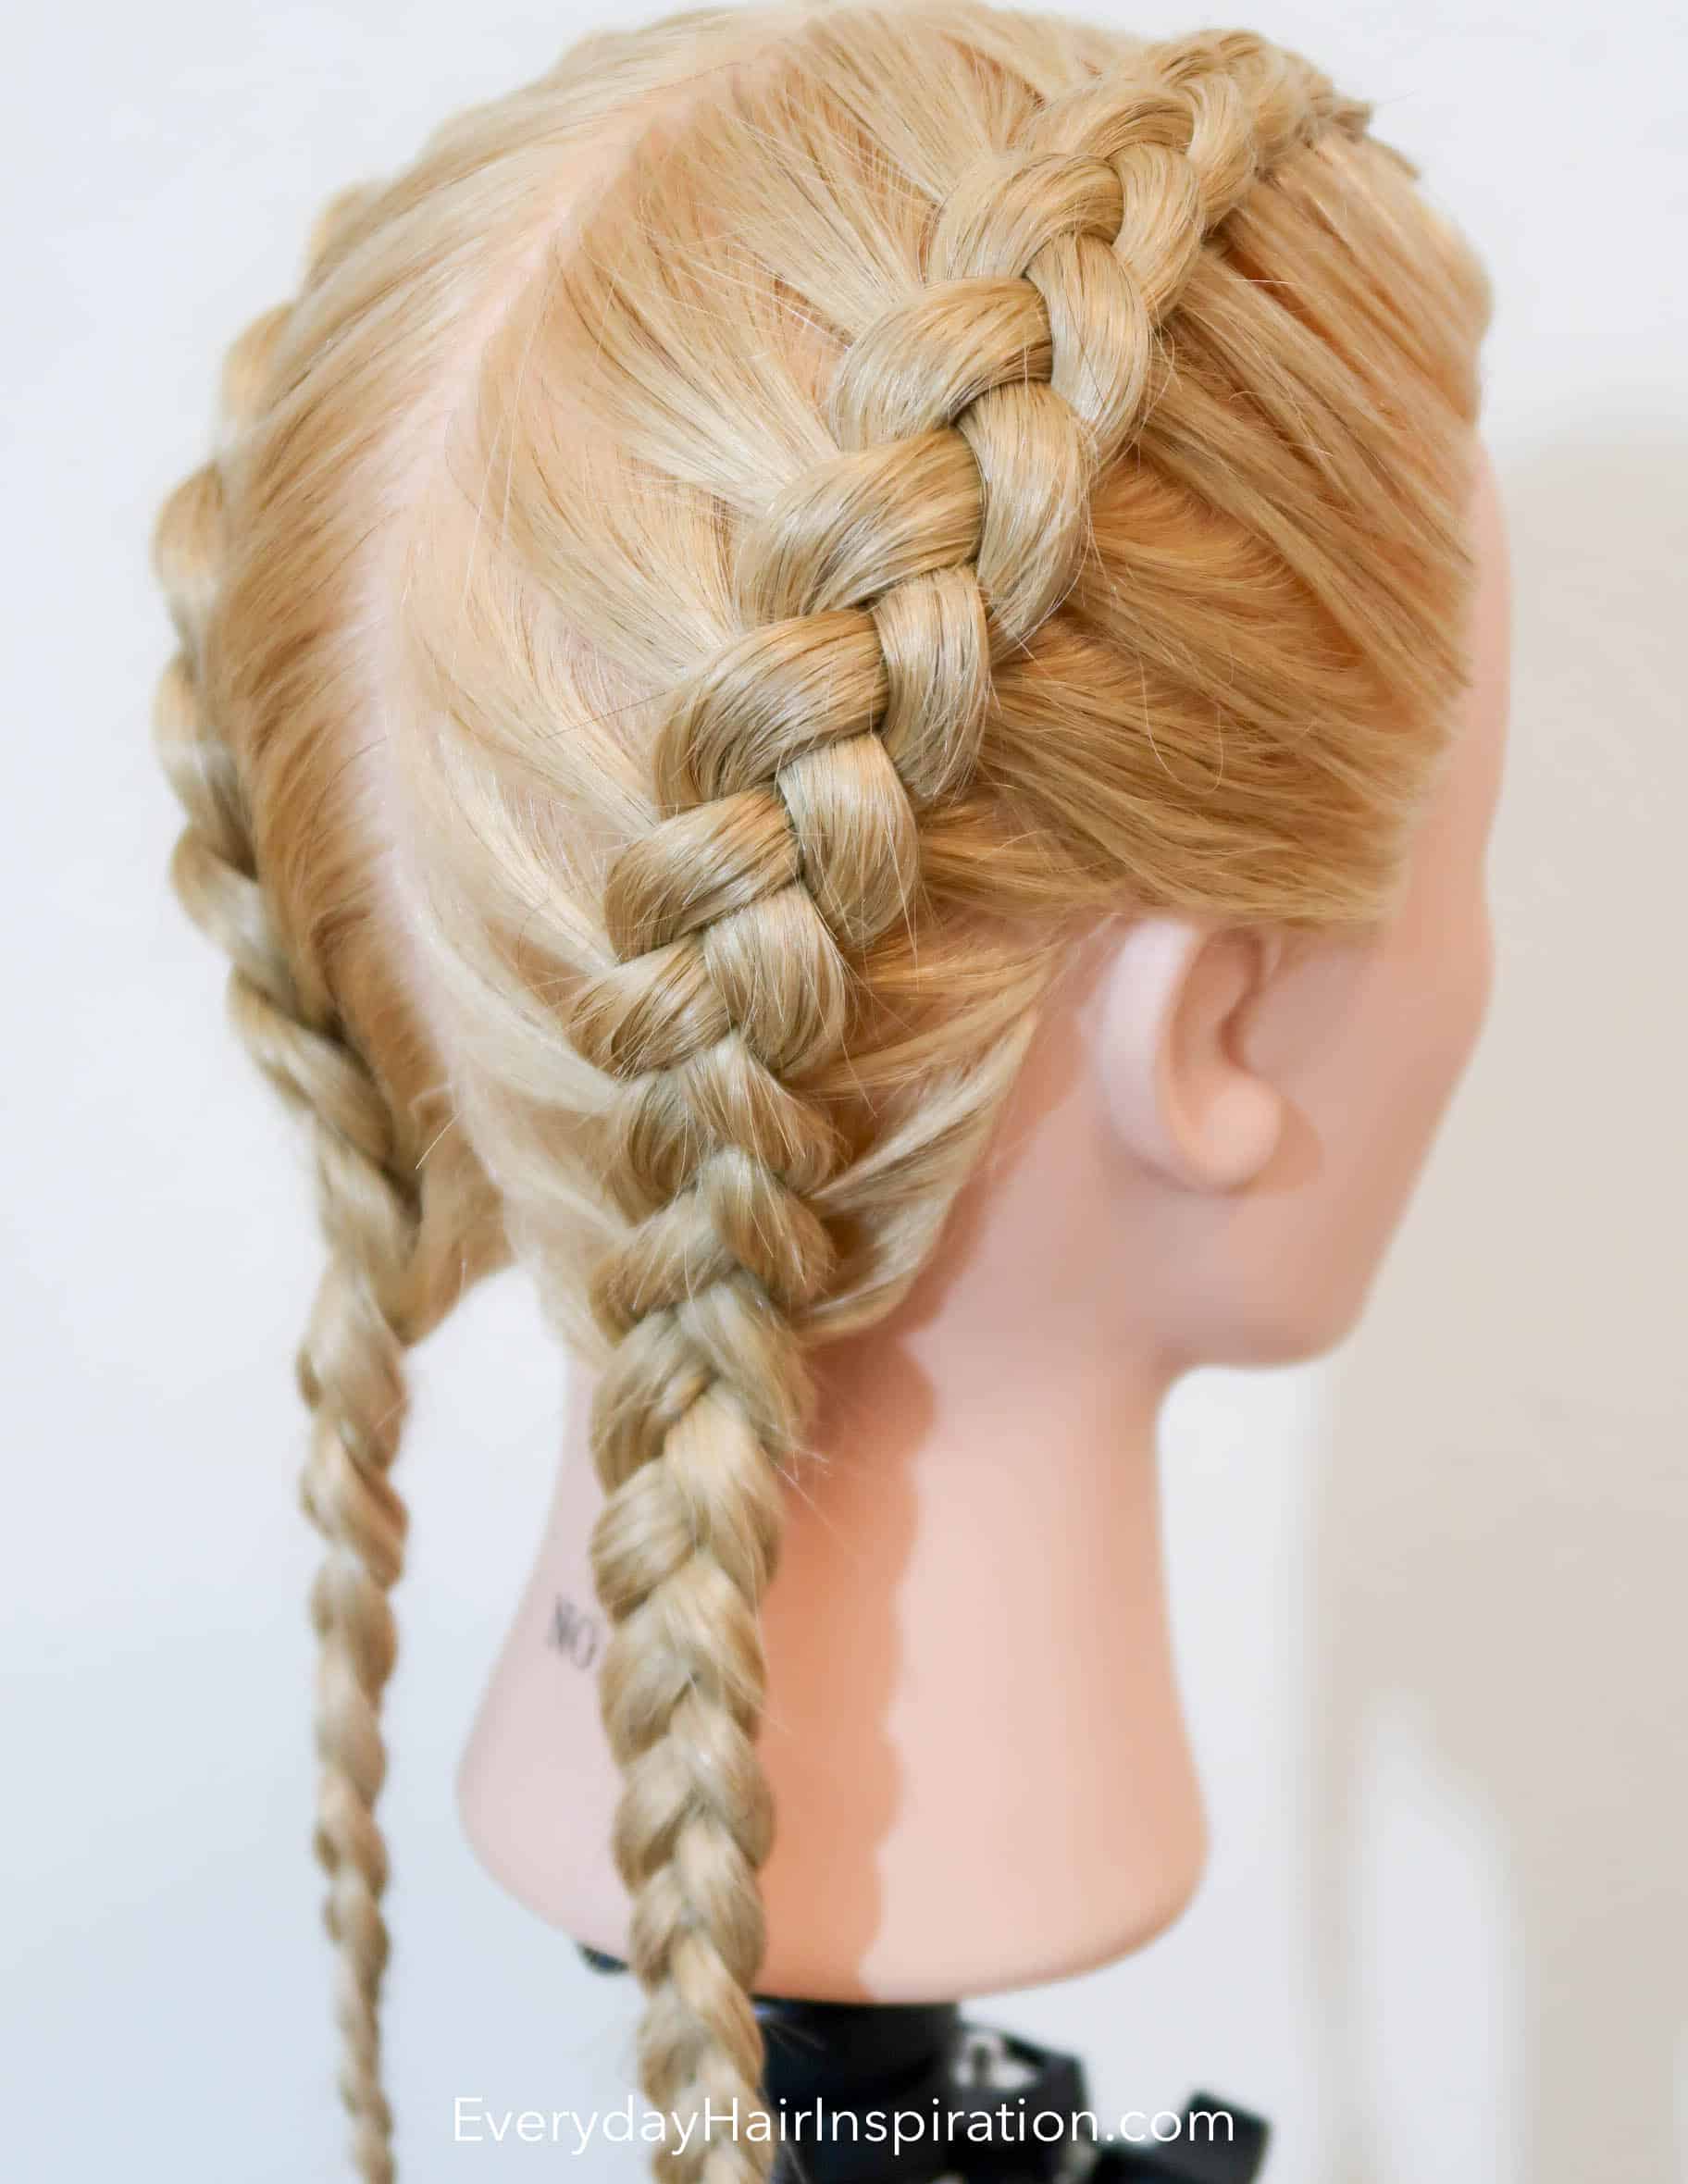 How To Dutch Braid Your Own Hair Step By Step For Complete